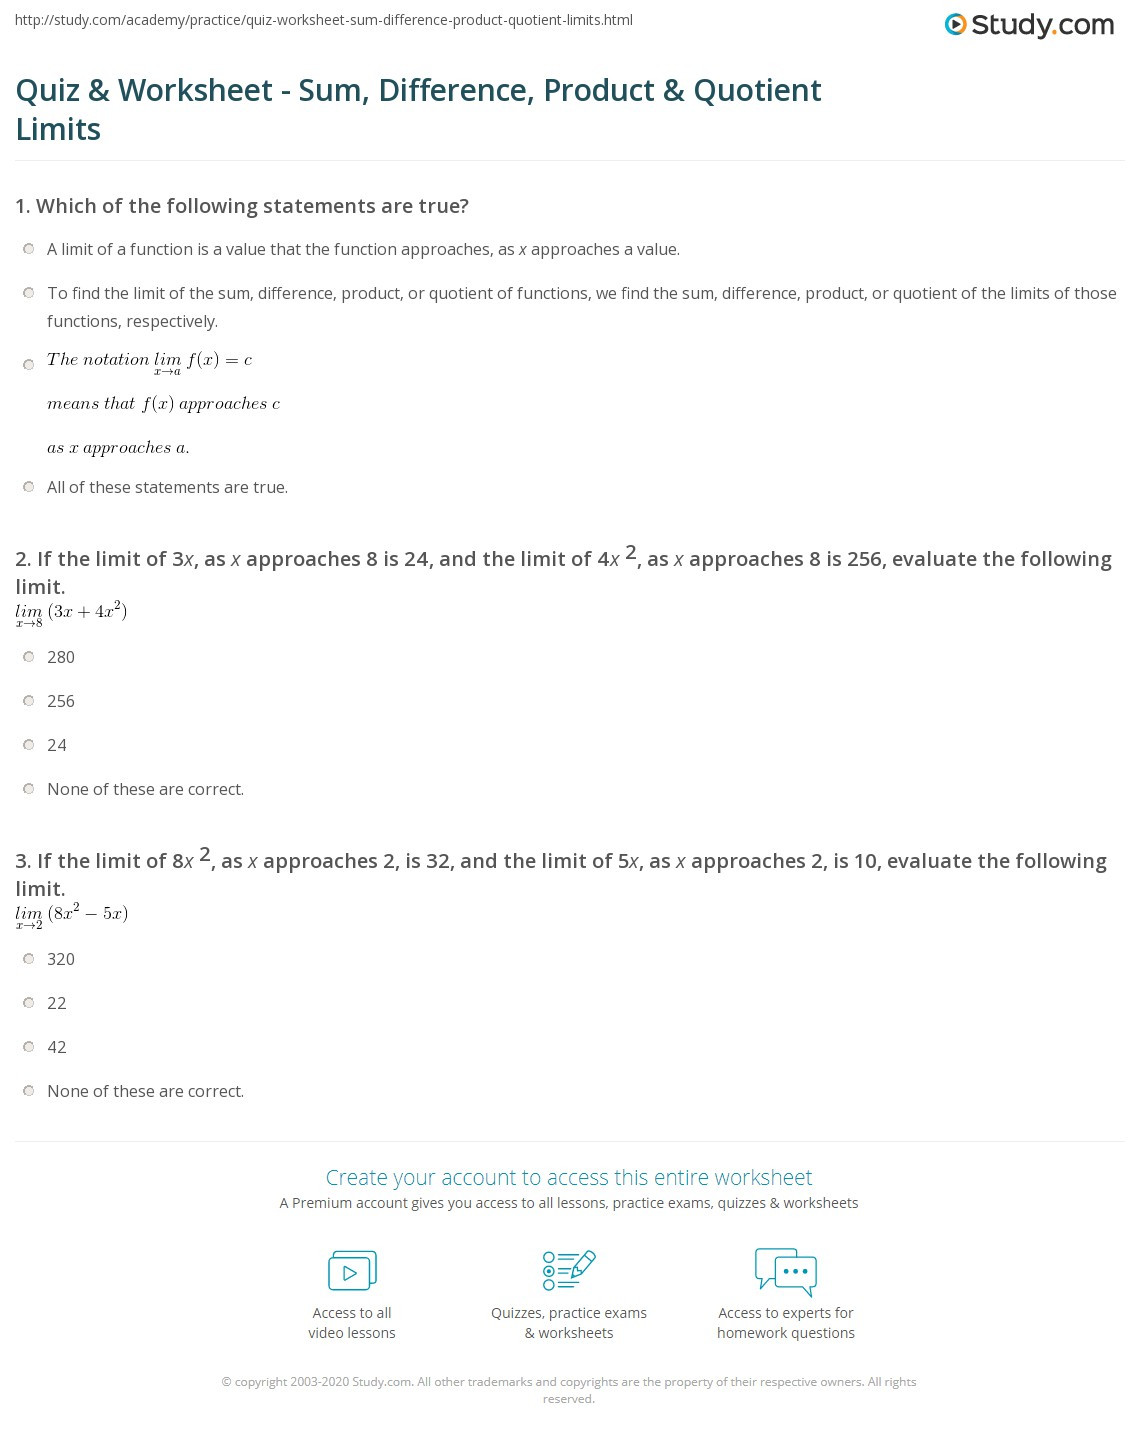 Product and Quotient Rule Worksheet Quiz &amp; Worksheet Sum Difference Product &amp; Quotient